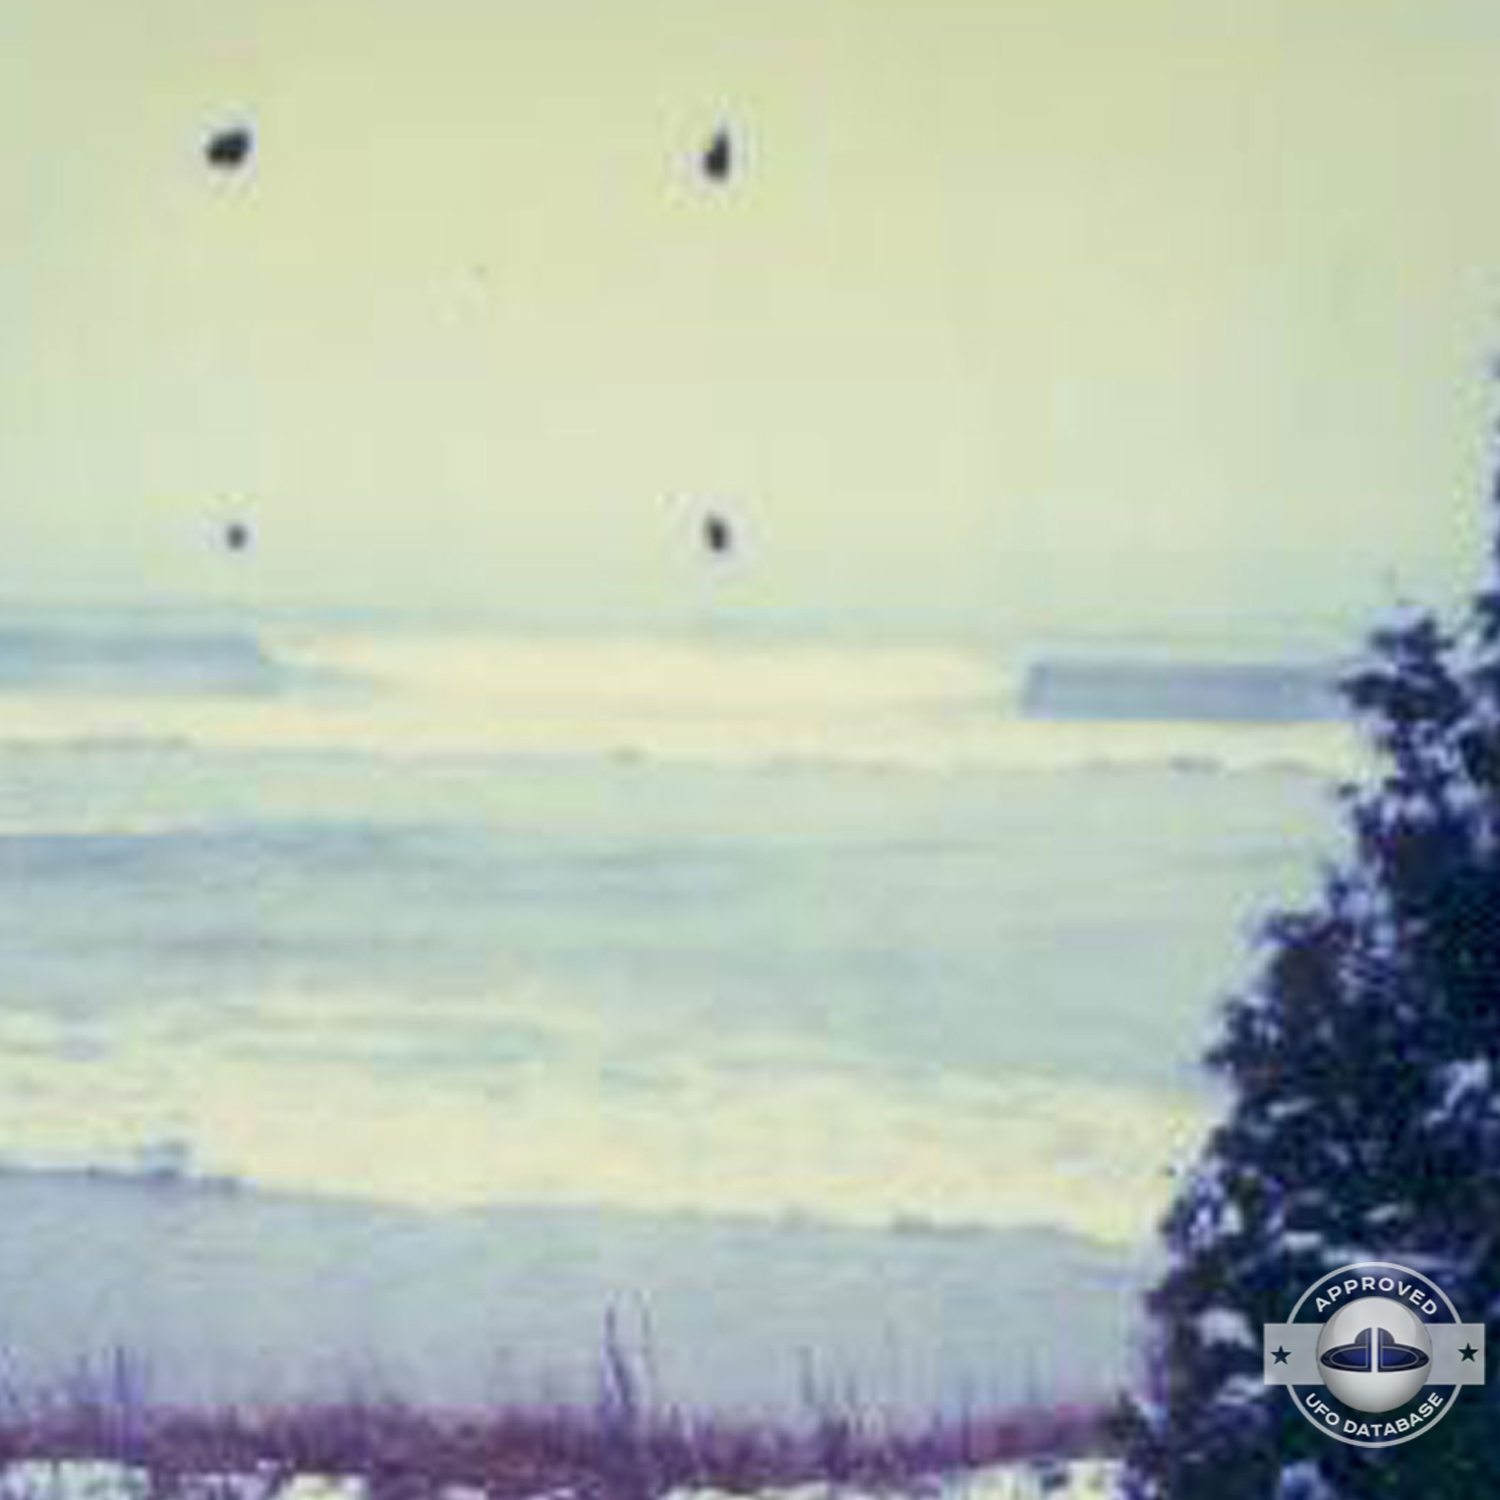 Lake Michigan Sighting of 4 ufos in a square formation - Winter 1985 UFO Picture #92-2